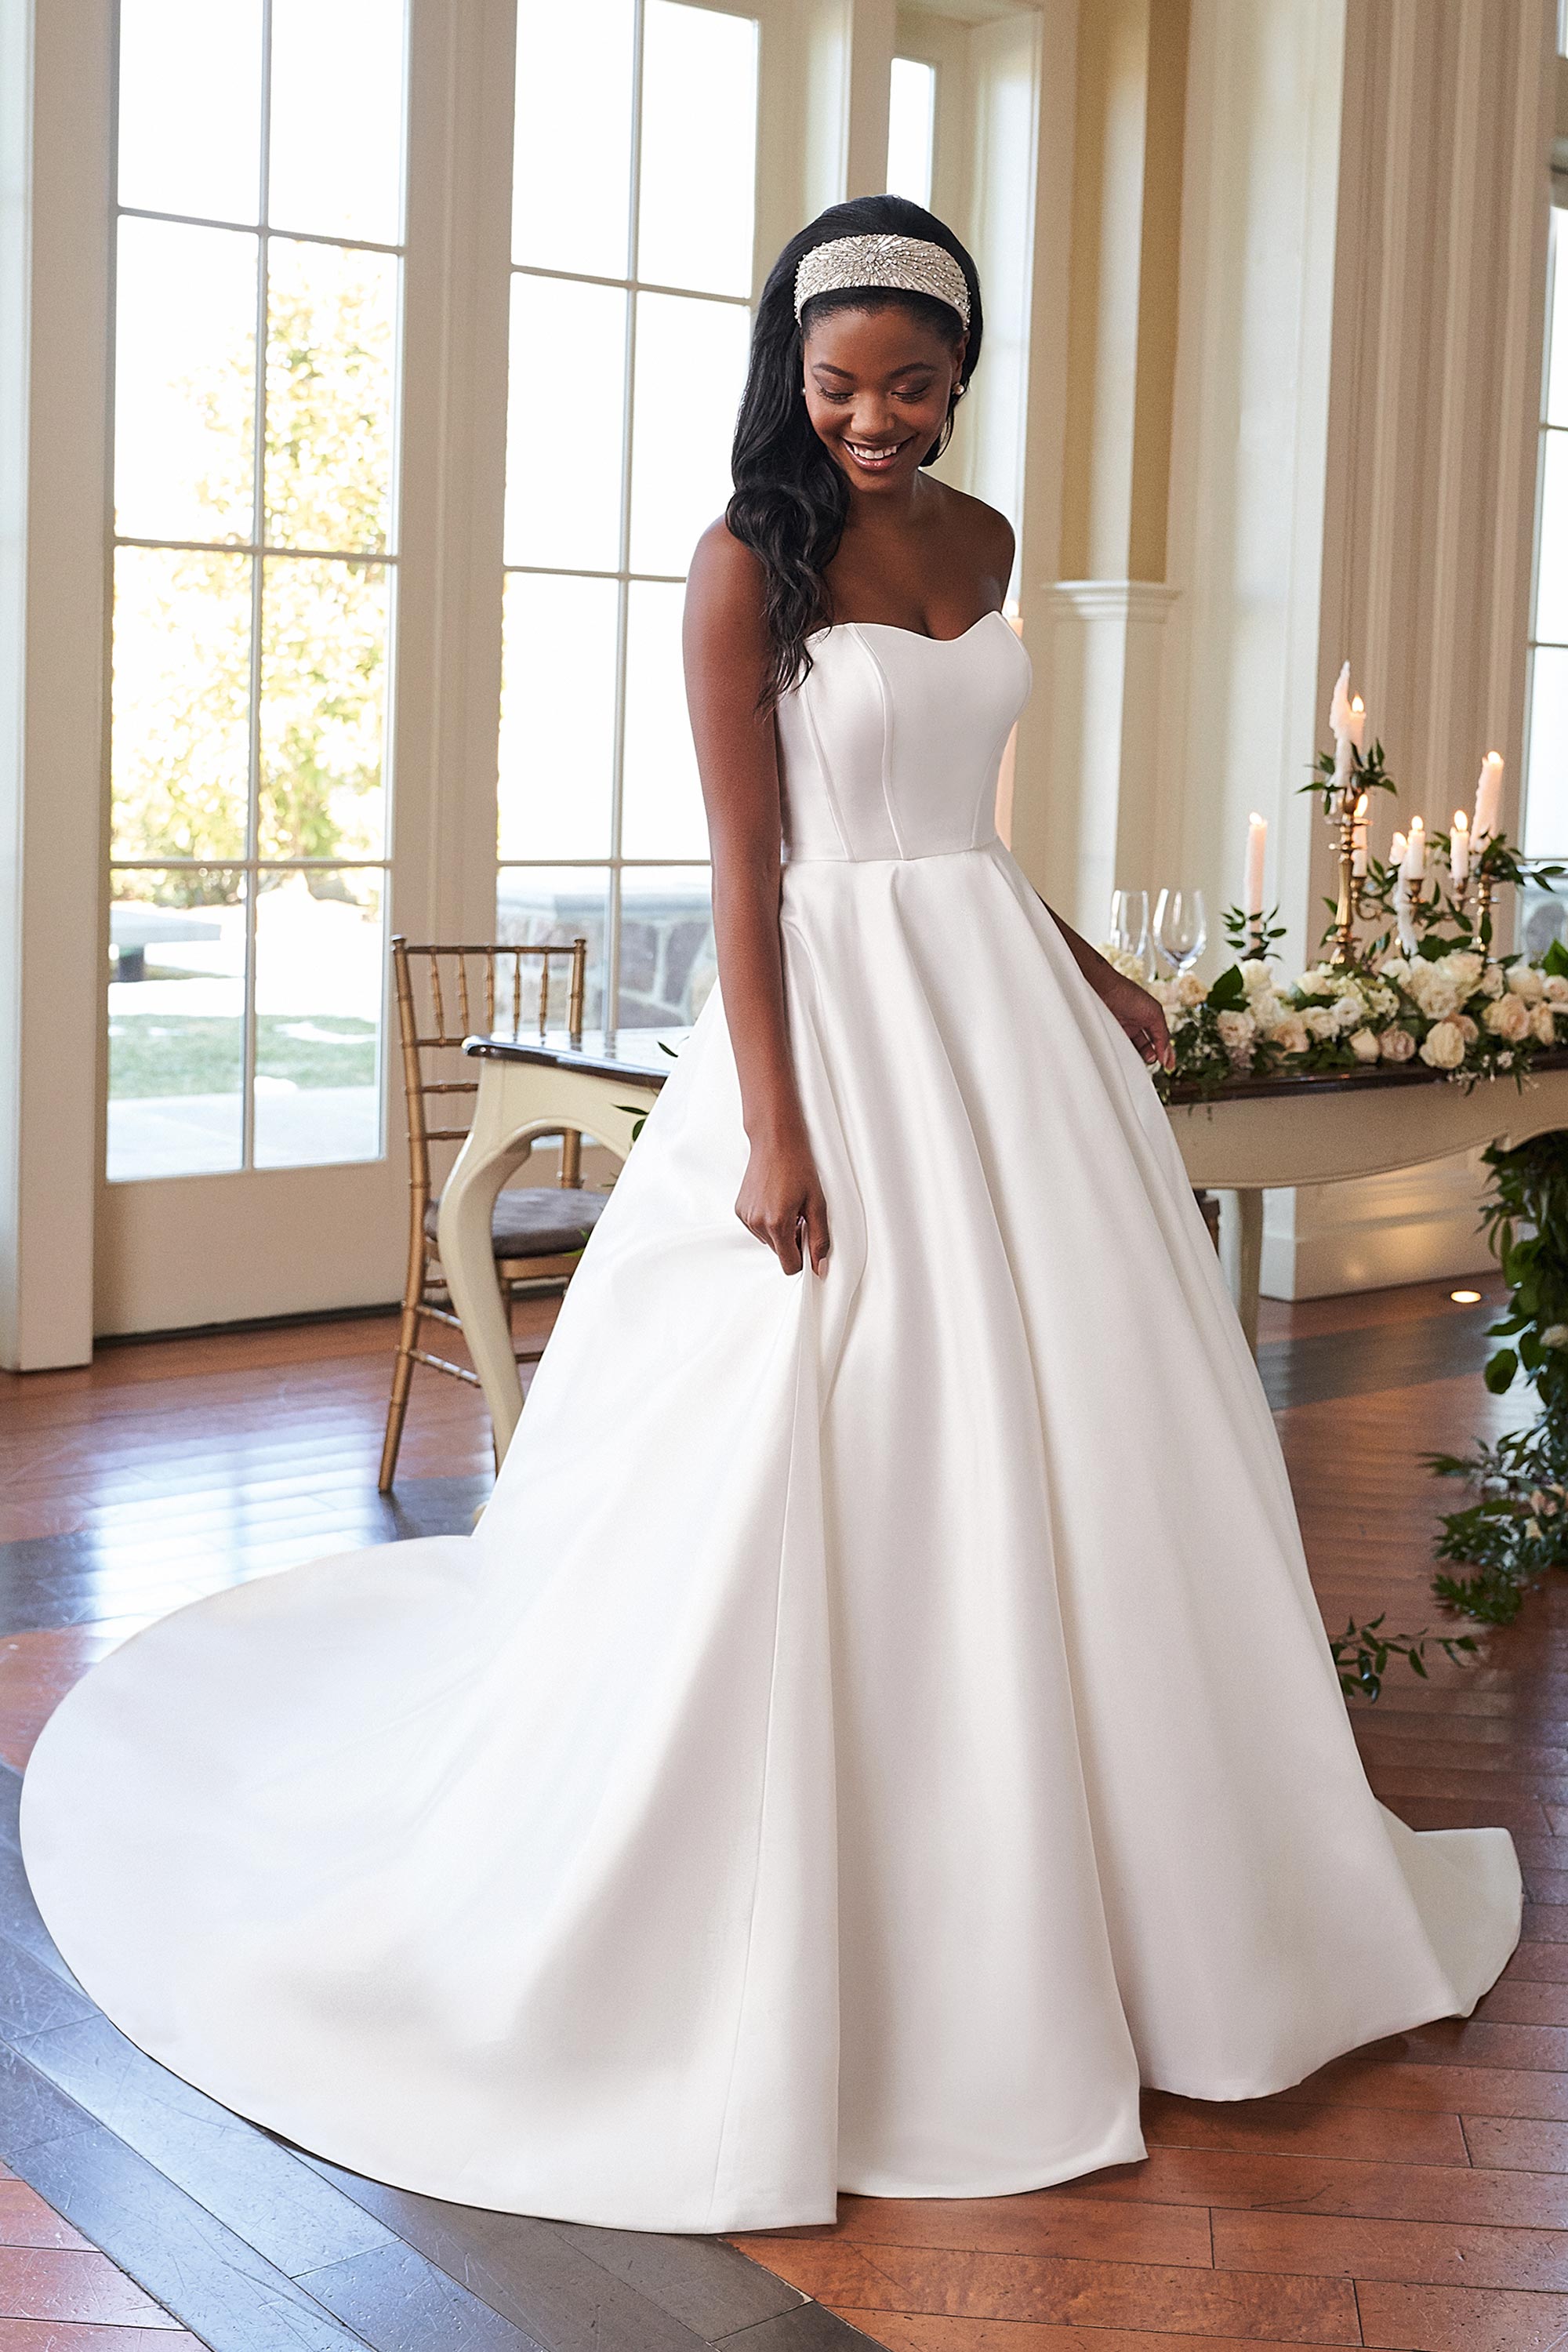 Show Sample: #44292 - Mikado Ball Gown with Smile Neckline